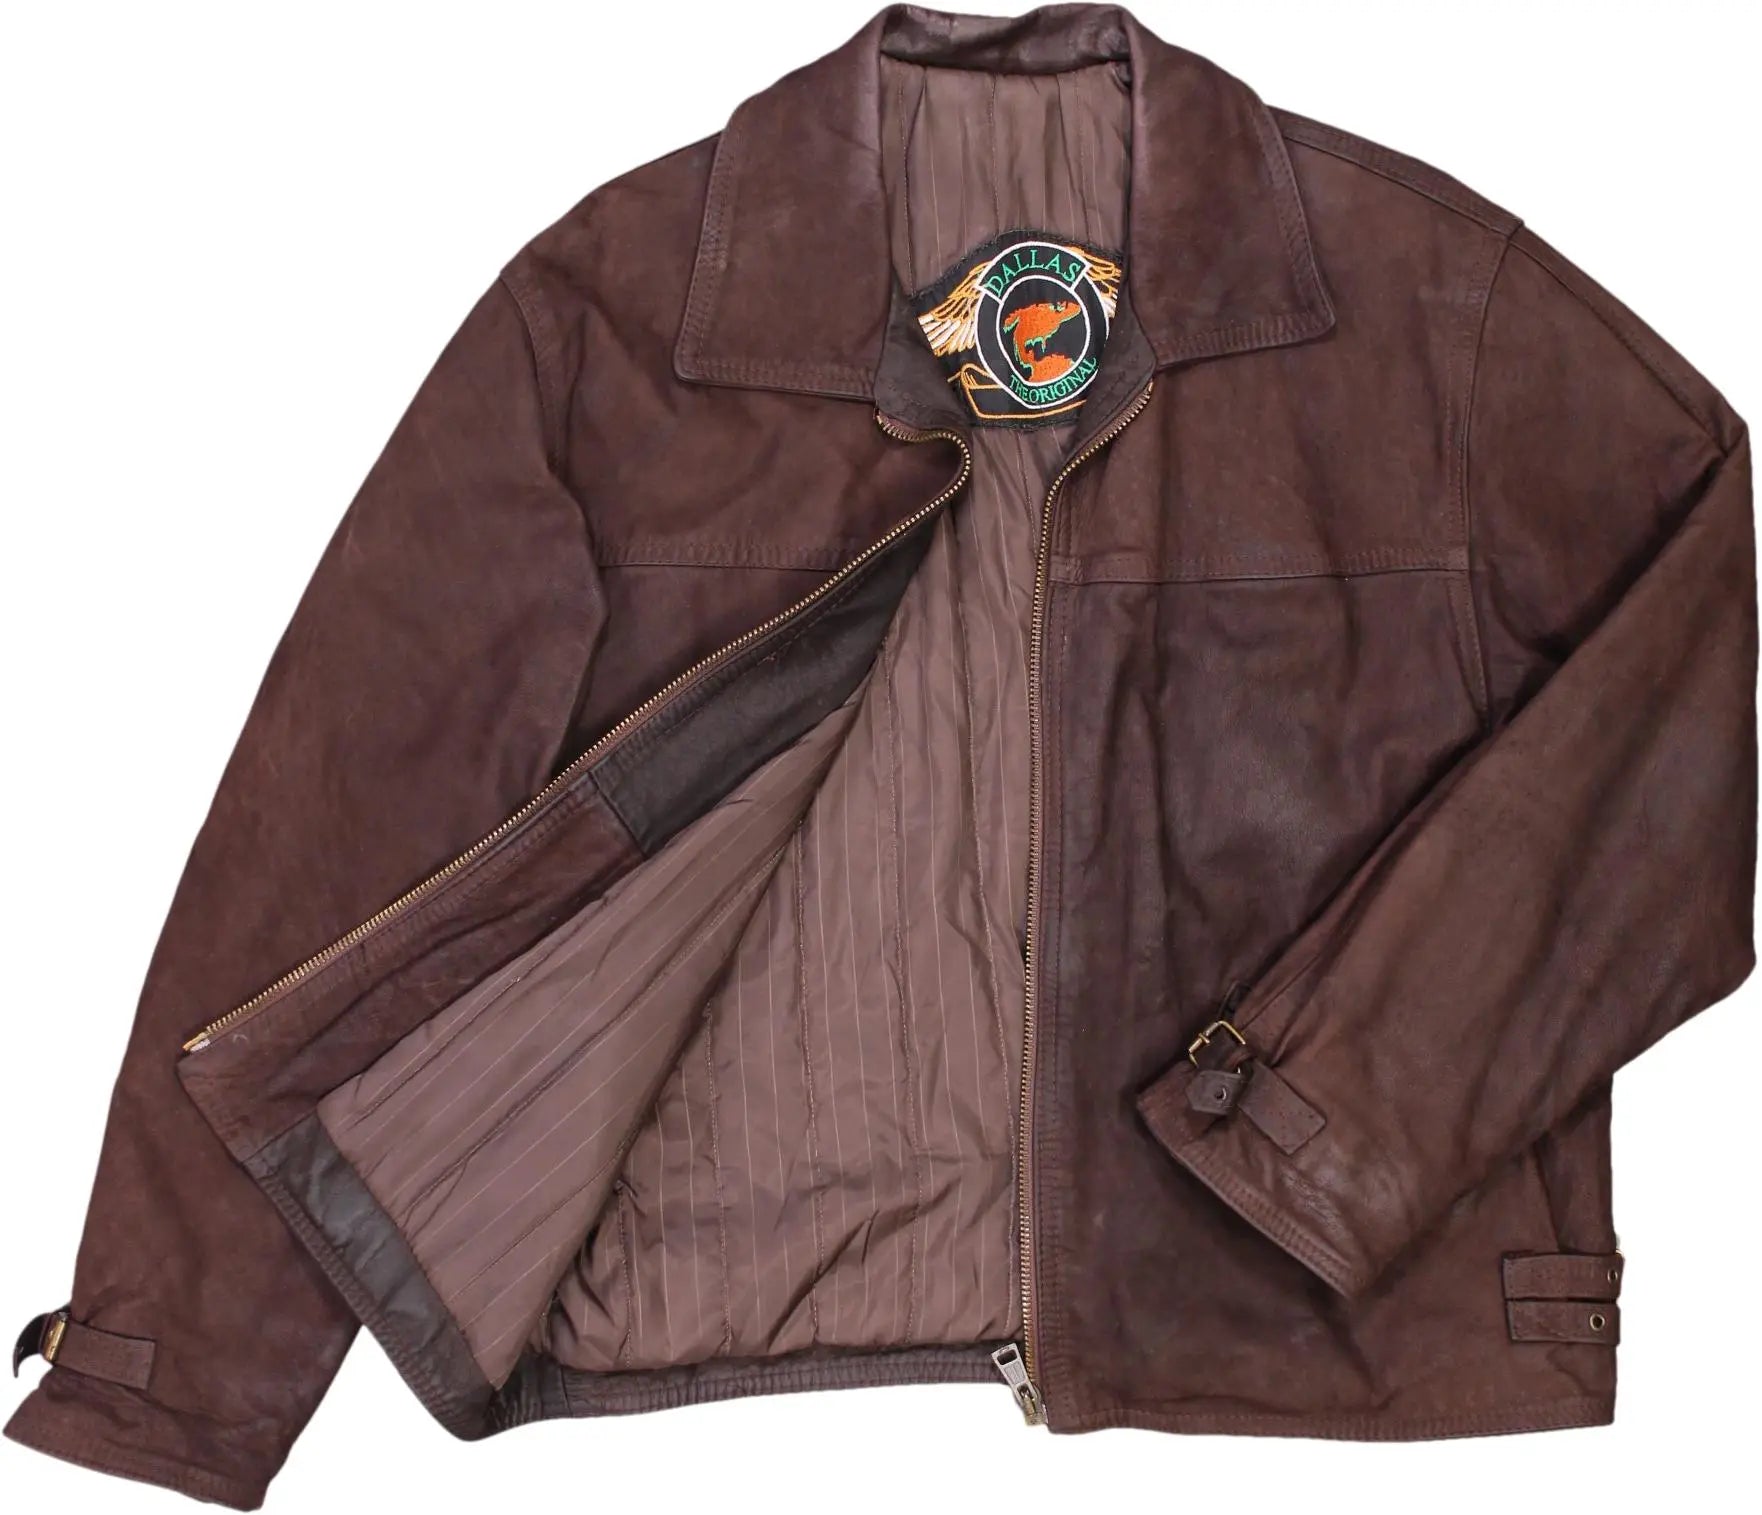 Dallas the original - Brown Leather Jacket- ThriftTale.com - Vintage and second handclothing